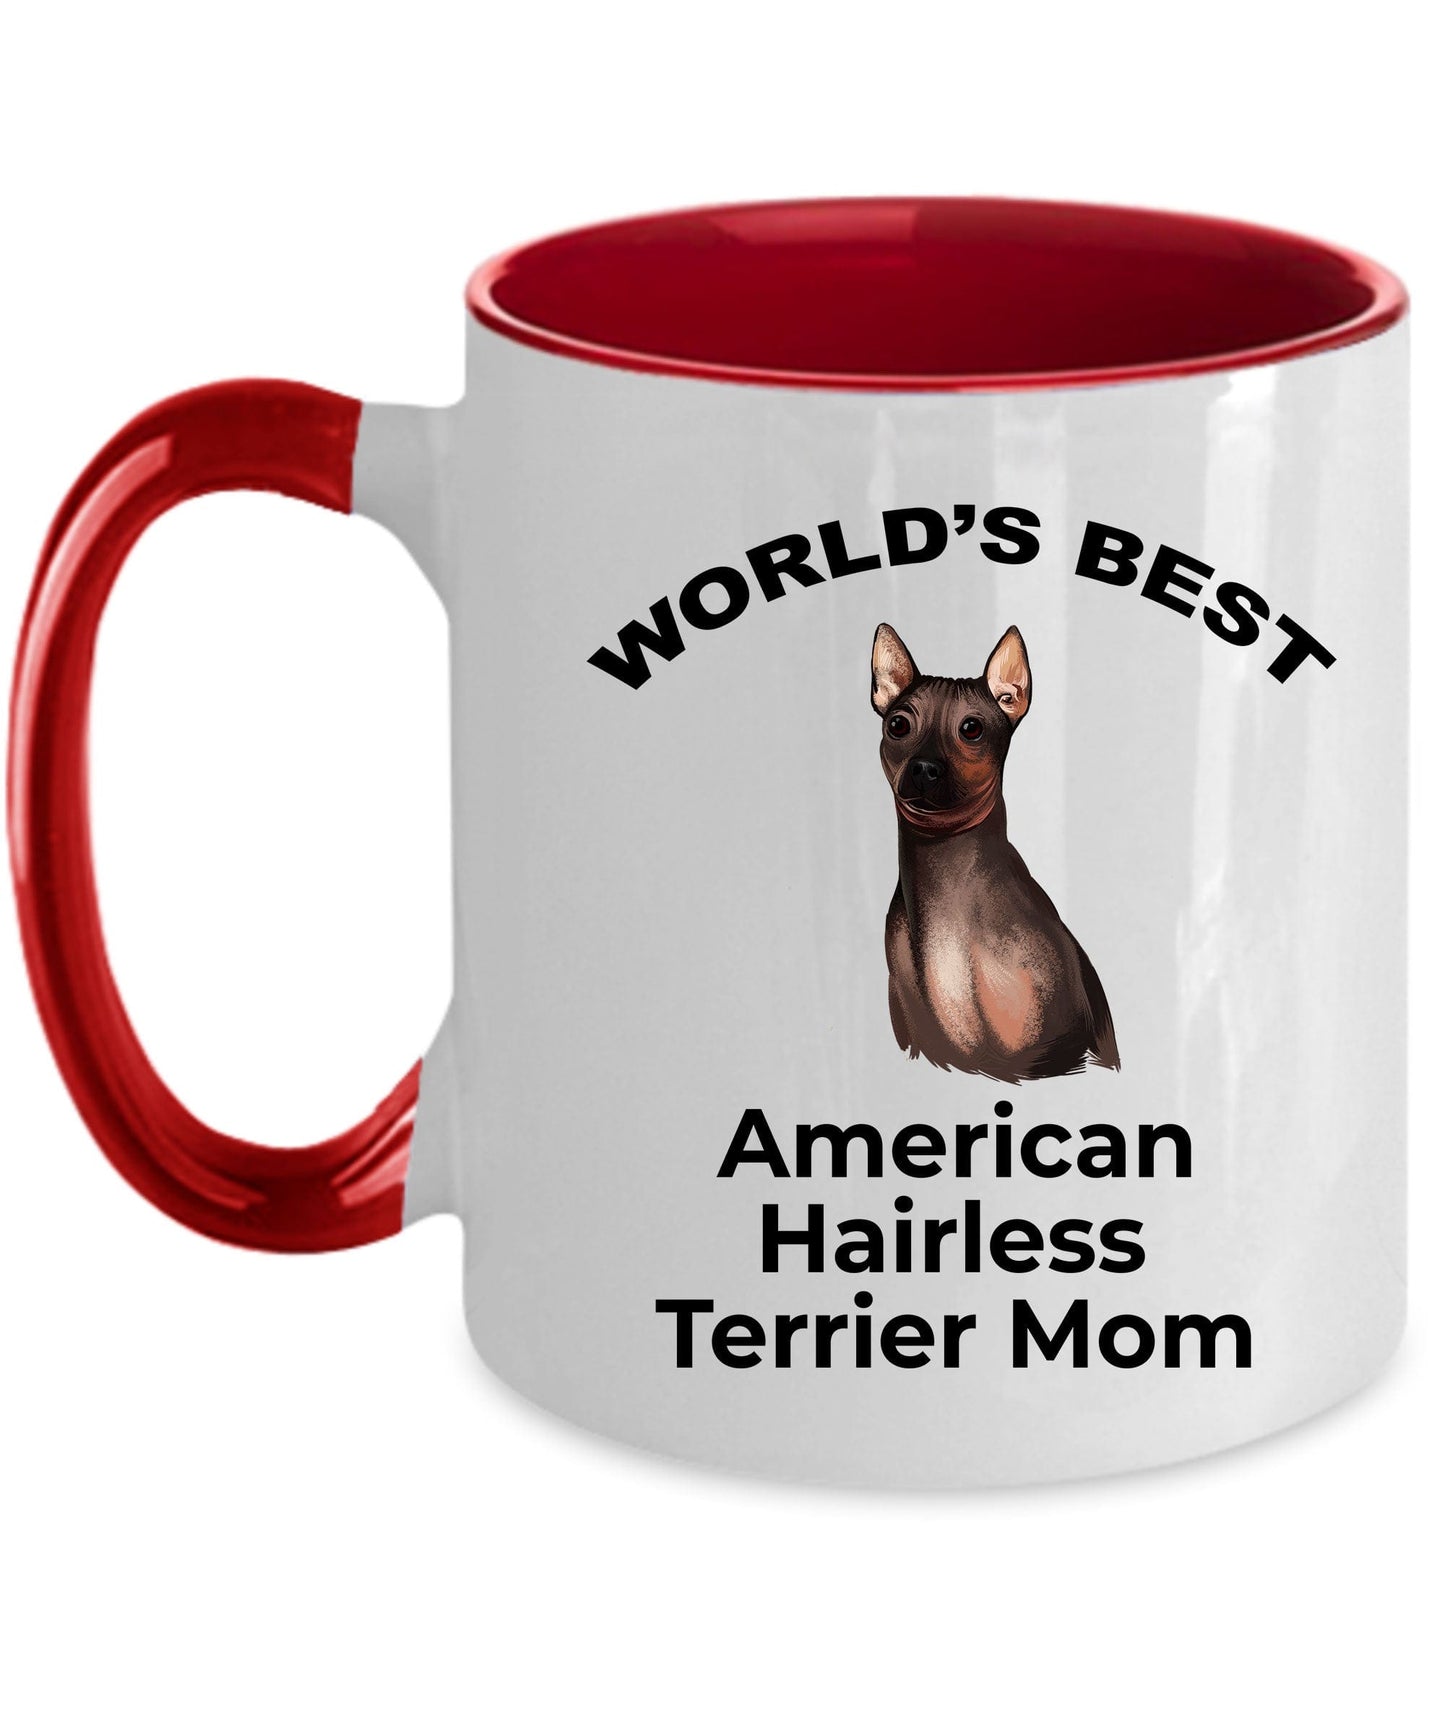 American Hairless Terrier Best Mom Coffee Mug - white, pink, black red and navy two tone